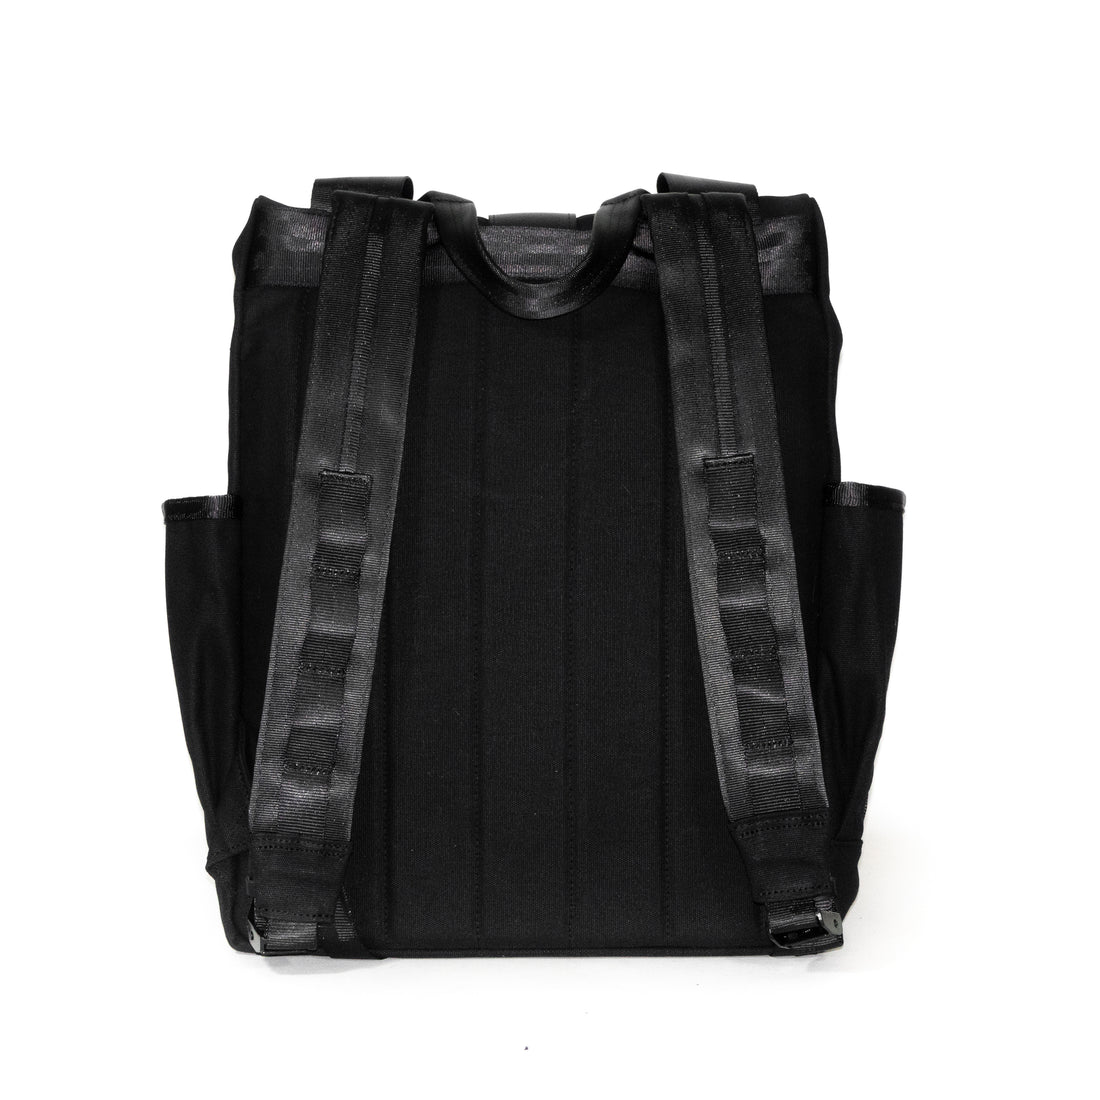 VerBockel 'Day Pack' Roll Top Backpack 2.0 Black TexWax™ Canvas